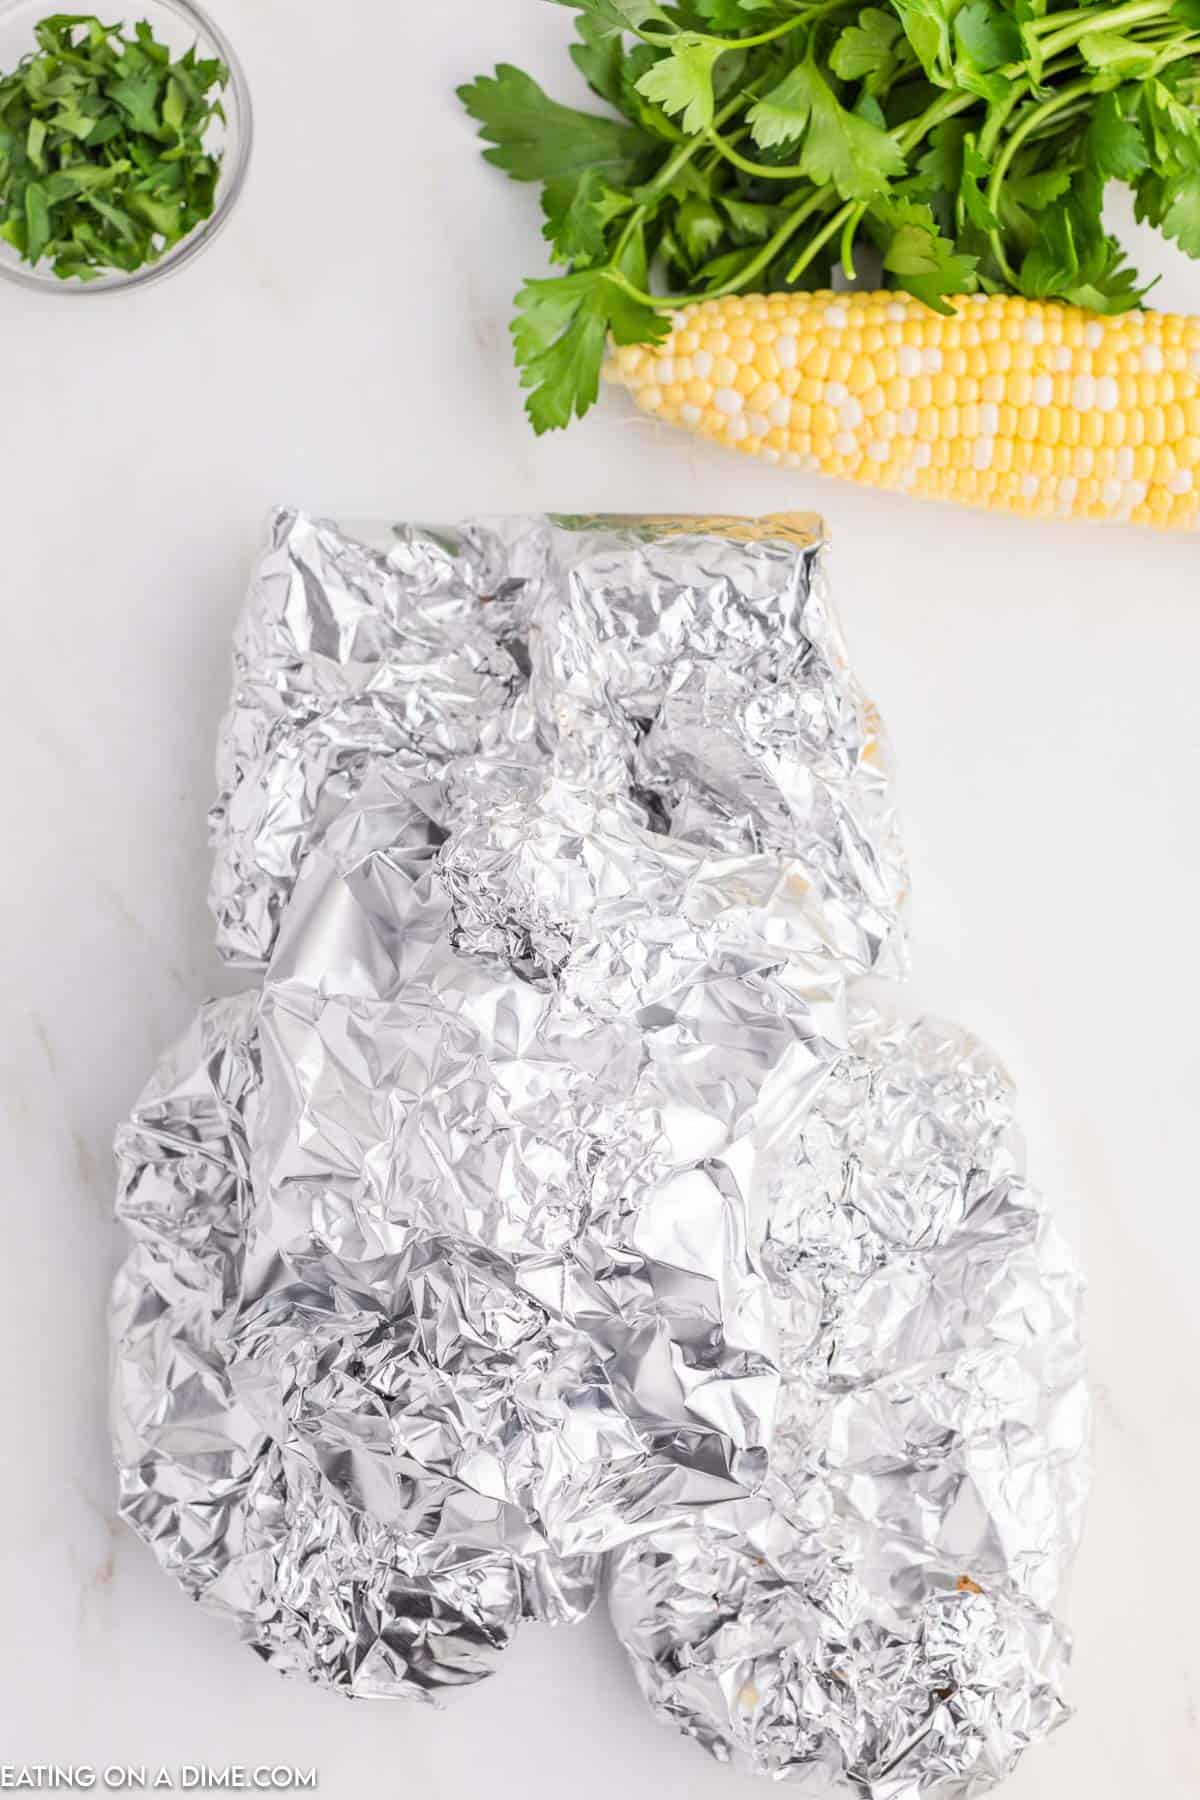 Folding the foil around the food with a corn on the cob on the side